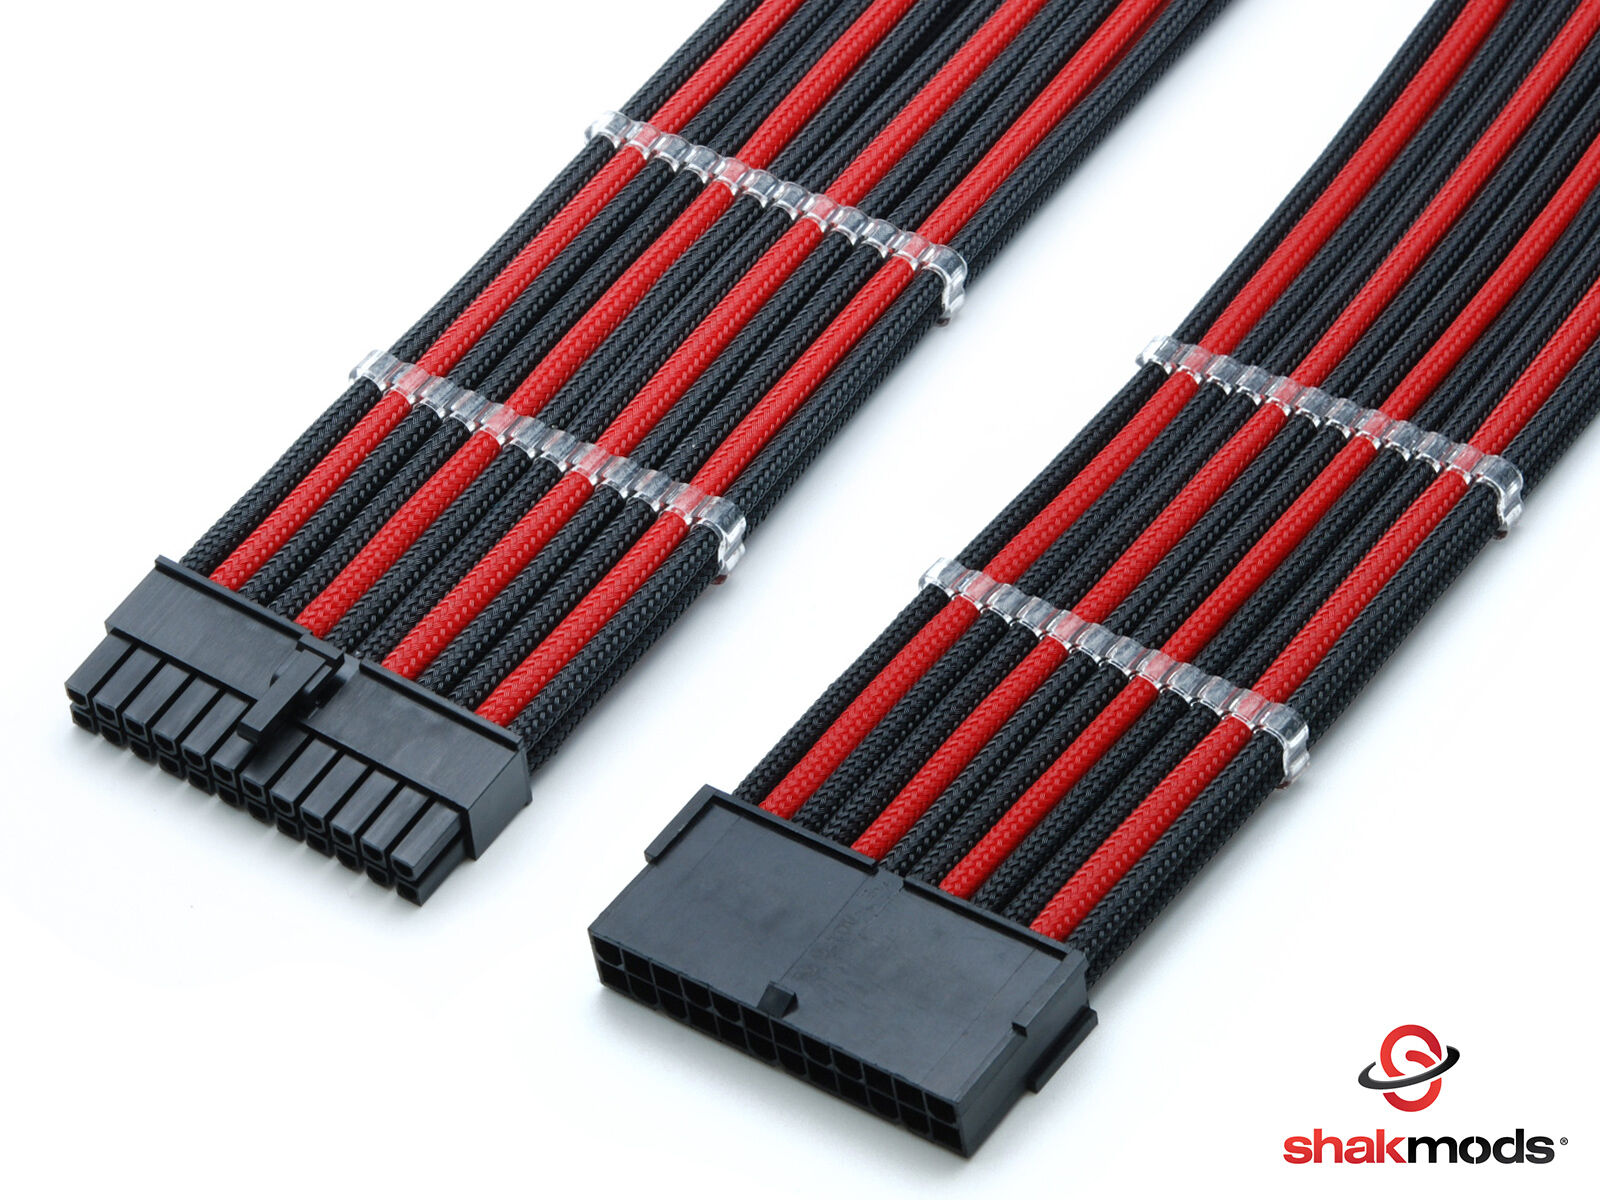 24pin ATX Mobo 30cm Black Red Sleeved PSU Extension Shakmods with 2 cable combs